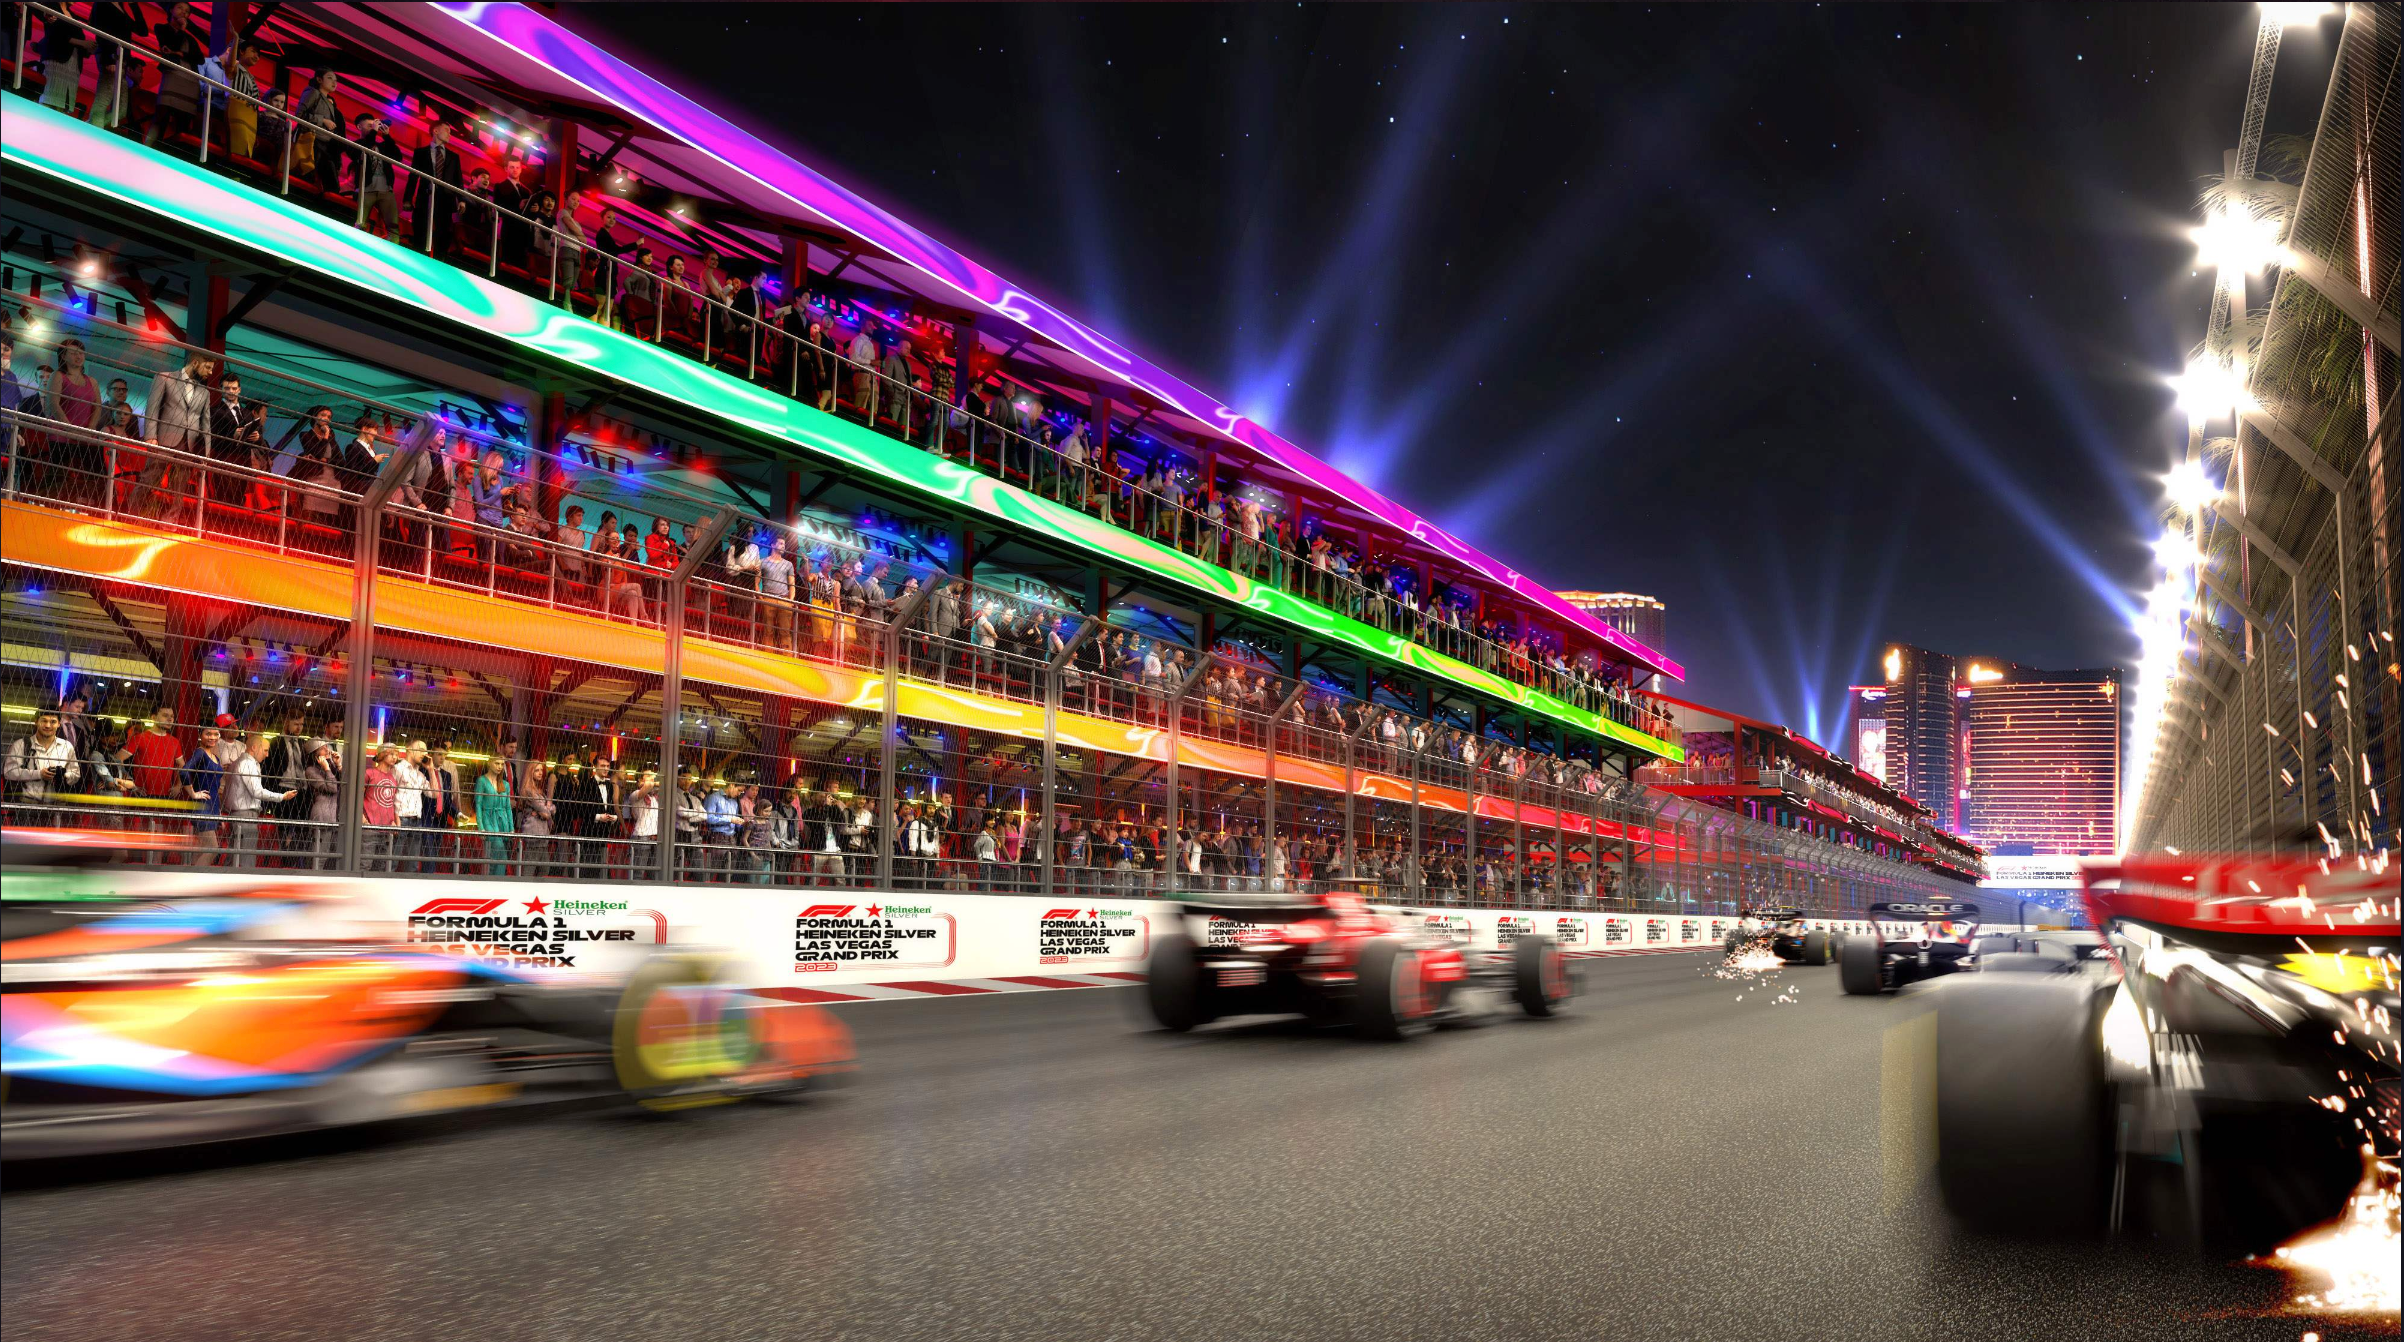 Bright colours and lights will be in full effect for the Saturday night race